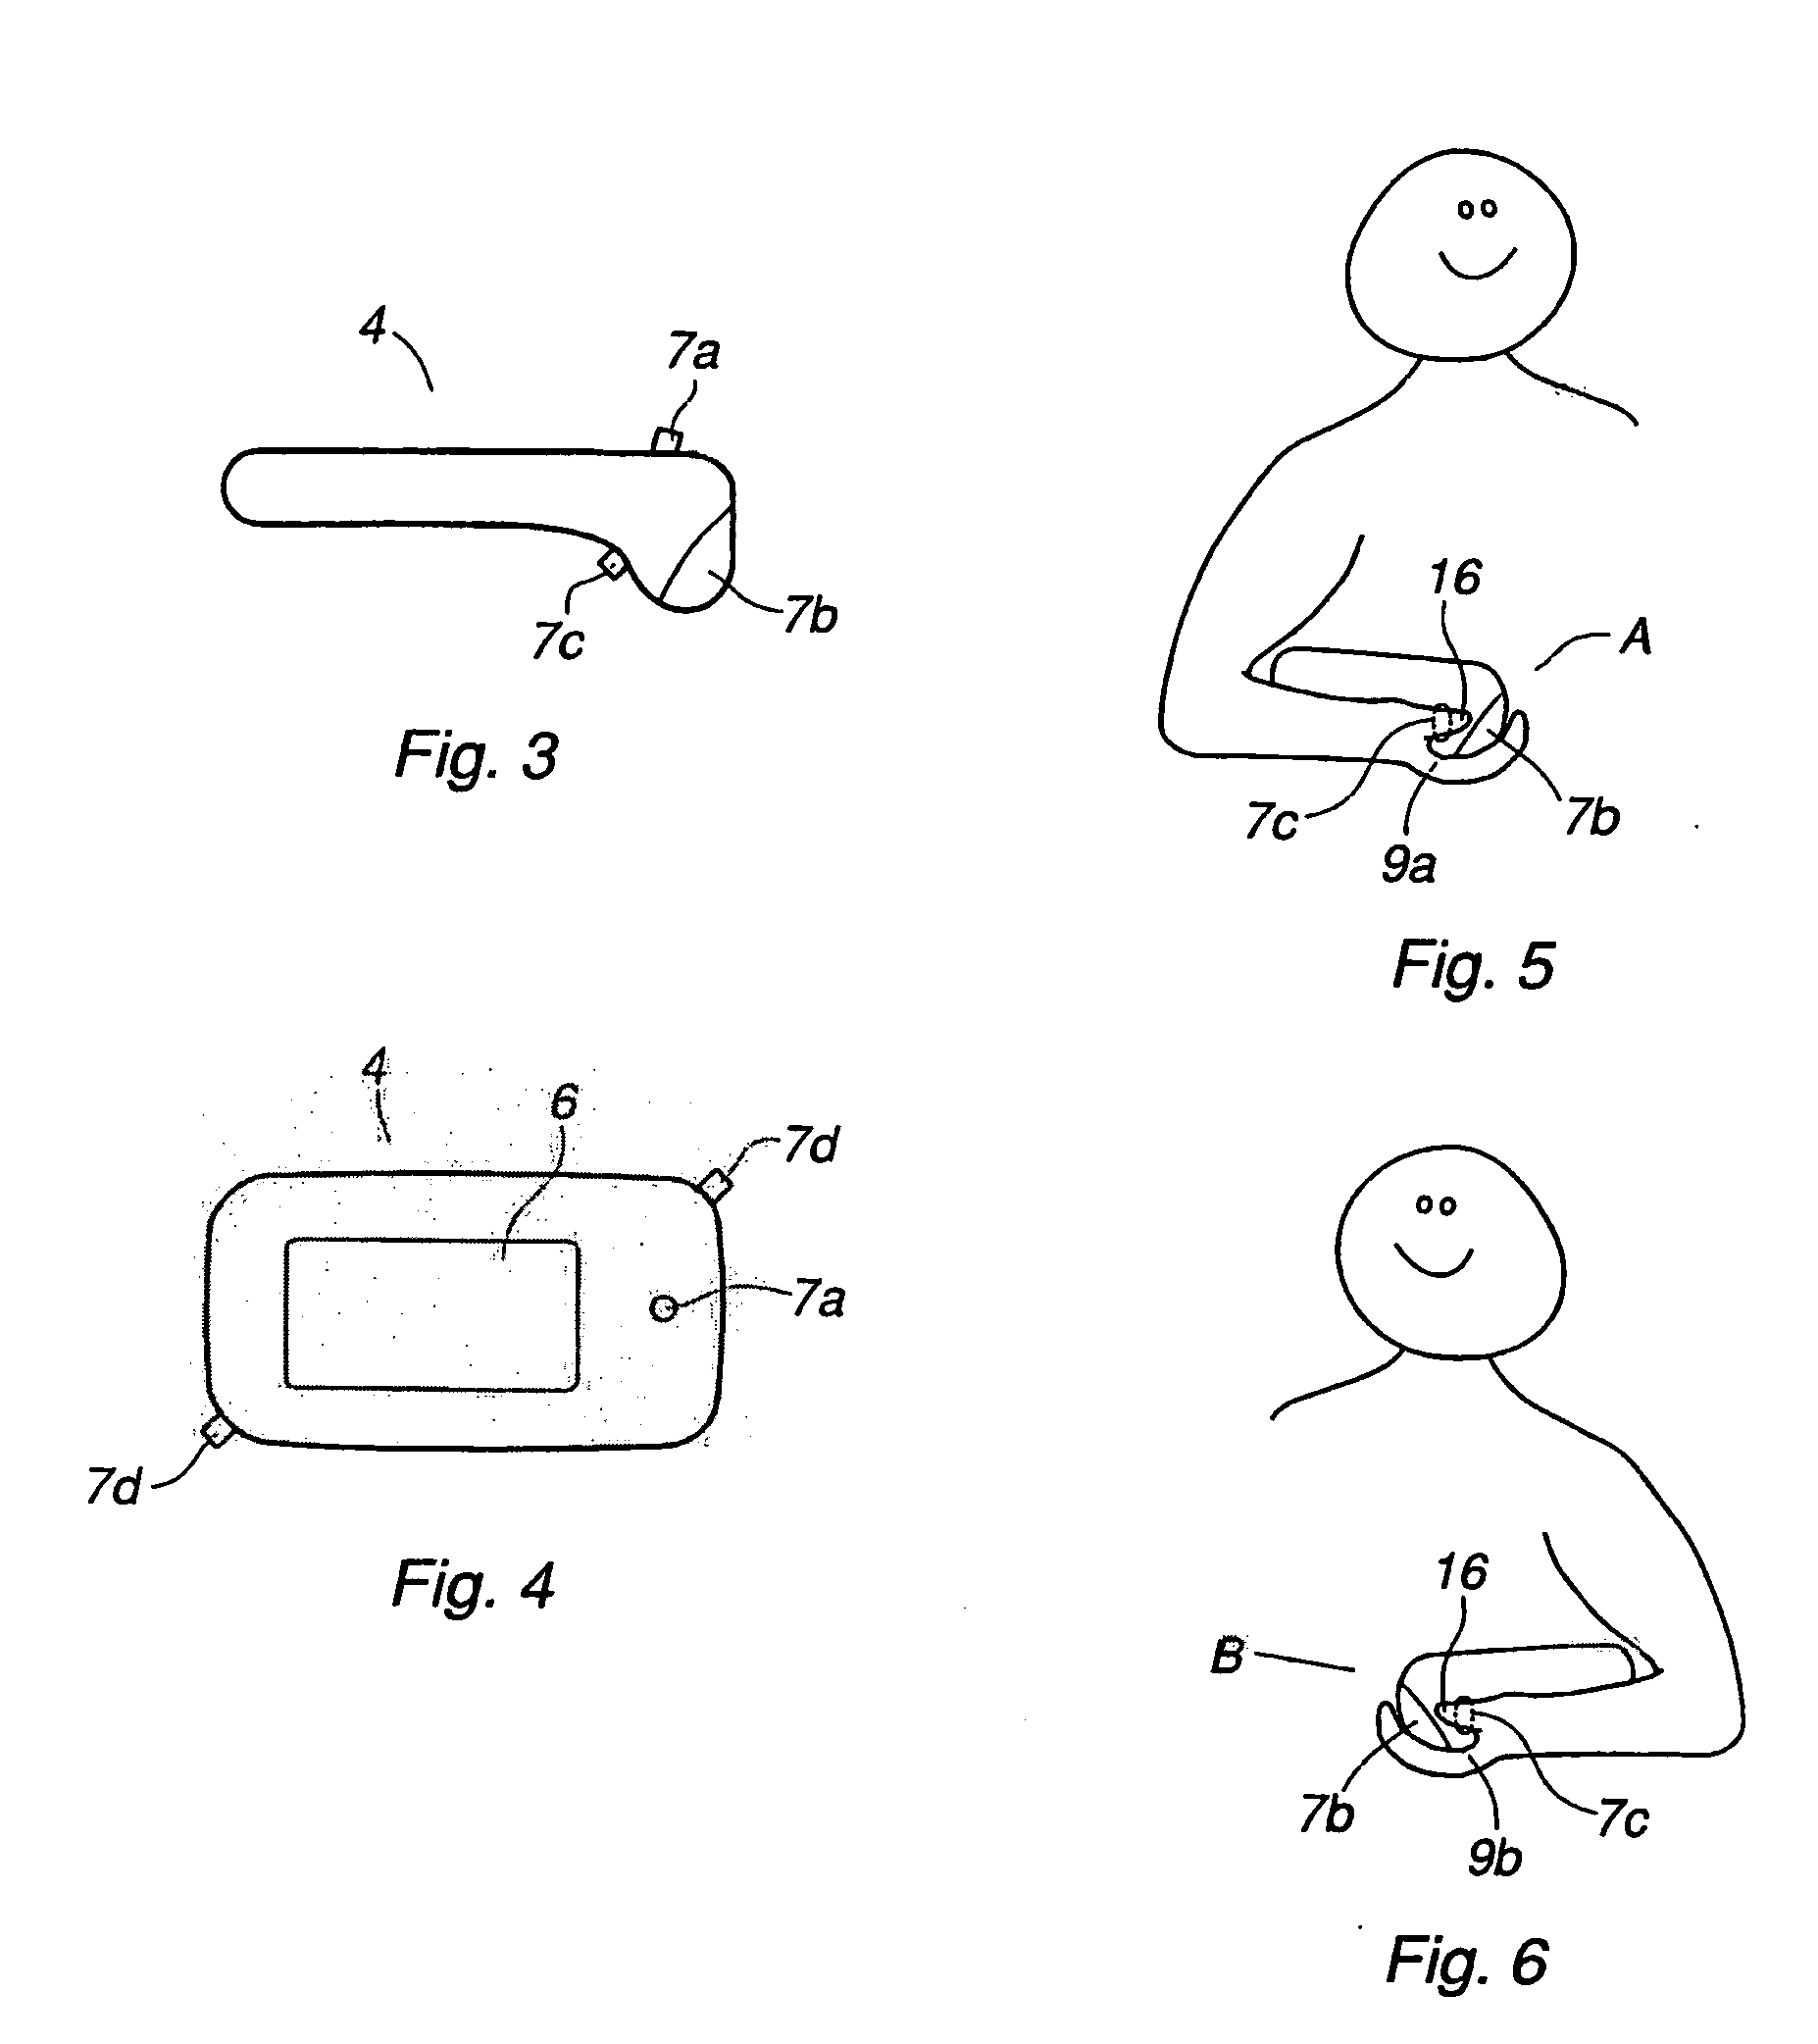 Industrial robot system comprising a programmable unit